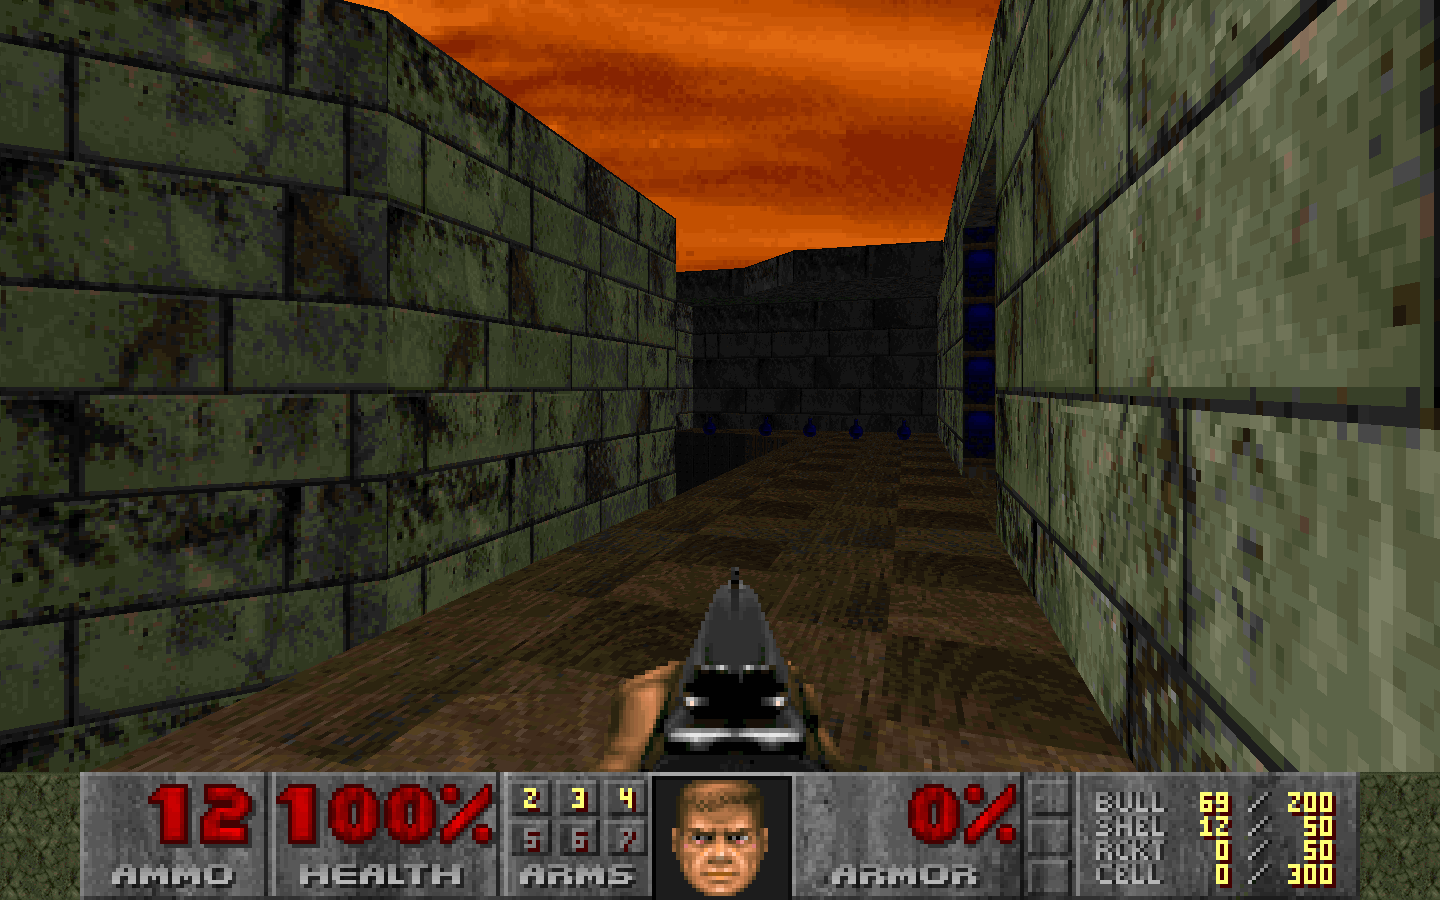 doom01.png.c53eaccecb7a17f6ea2c26a77bbb68ae.png